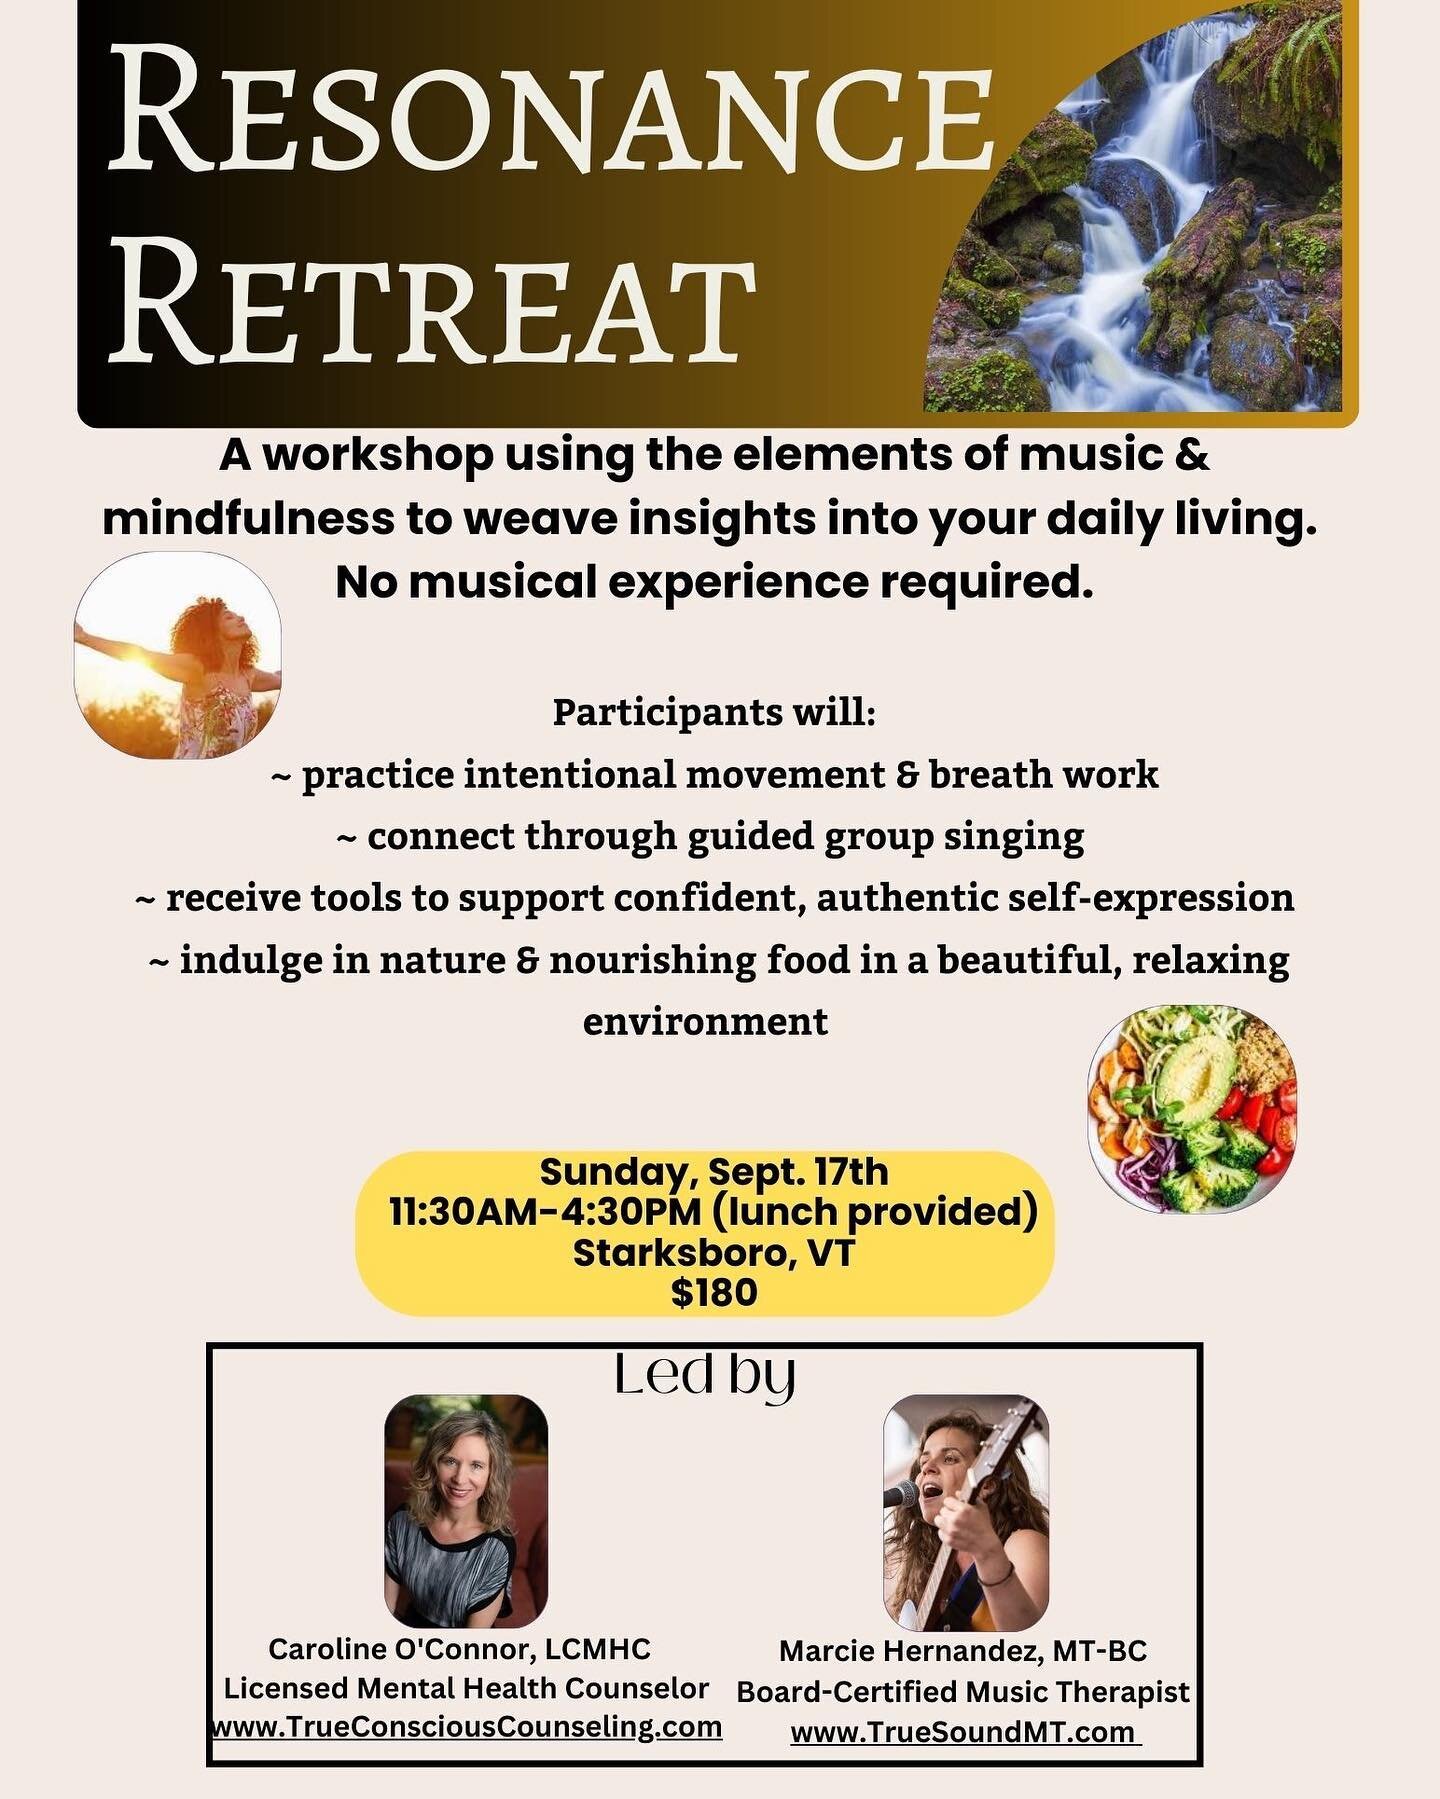 Dear Friends &amp; Community-- I'm thrilled to announce this special offering that I've been cooking up with my friend &amp; colleague, Marcie Hernandez. I invite you to come join us on Sunday, Sept. 17th for Resonance Retreat - a workshop where you'